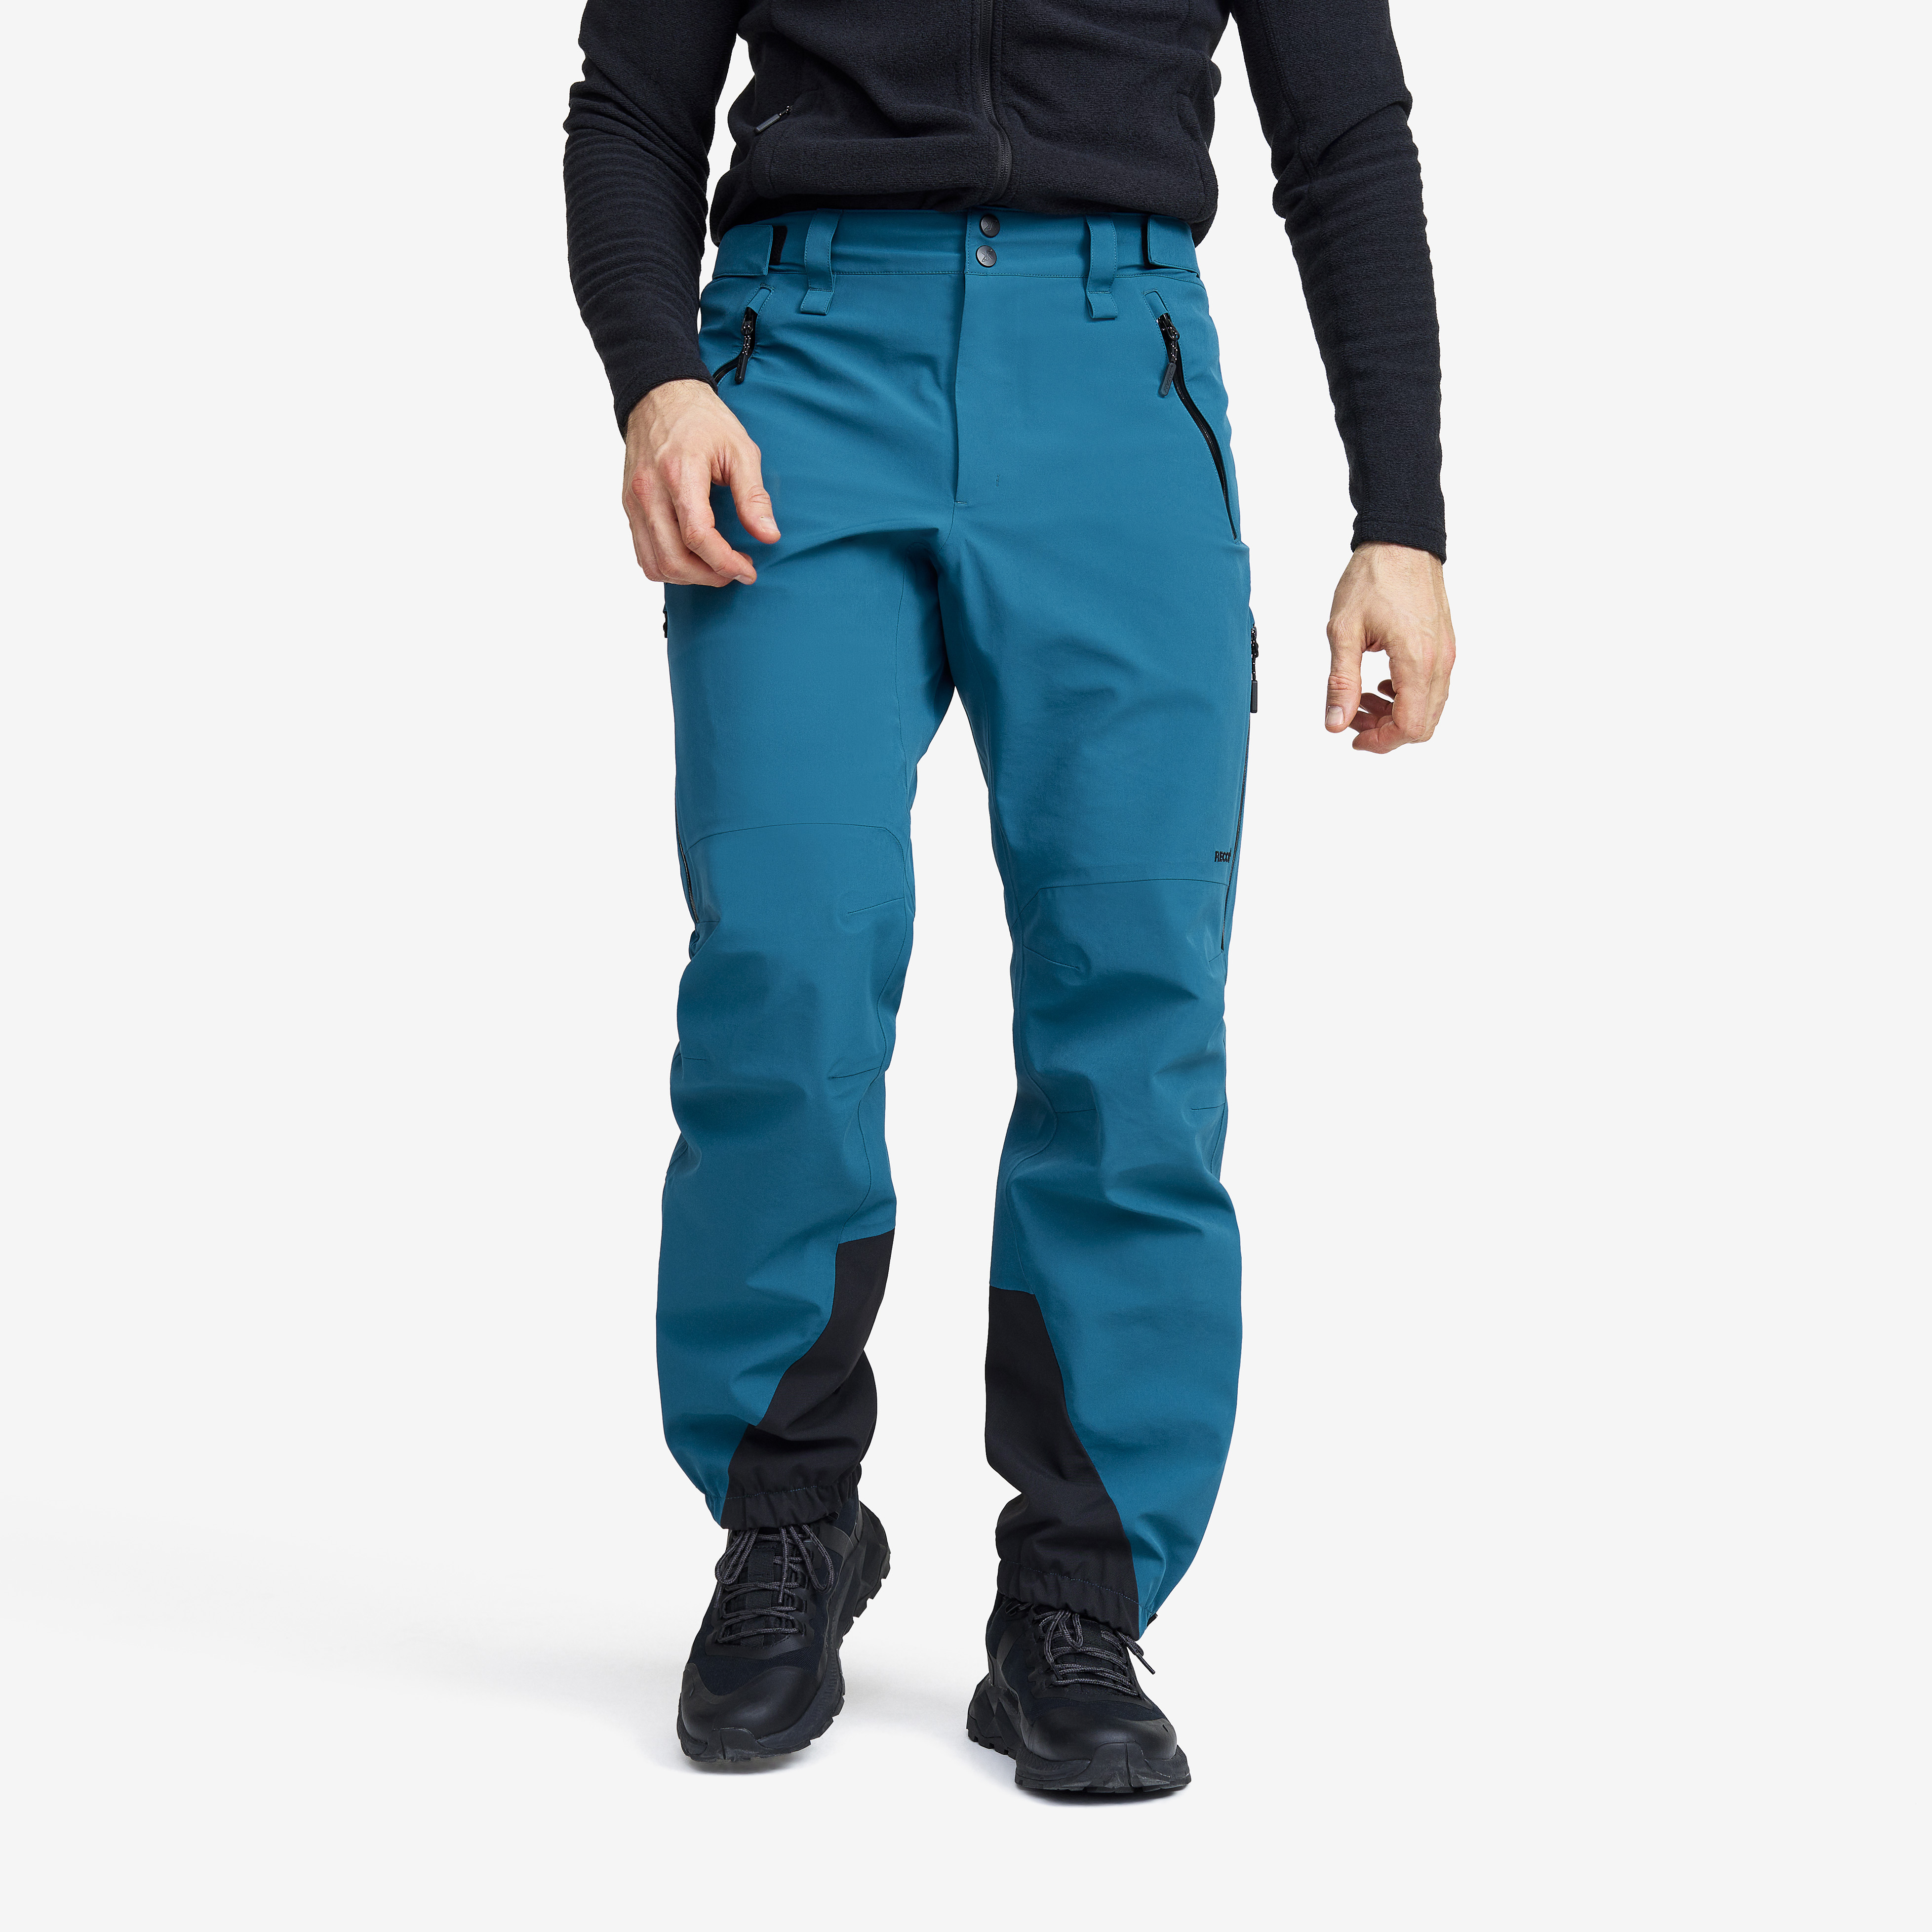 Cyclone 3L Shell Pants Moroccan Blue Hombres